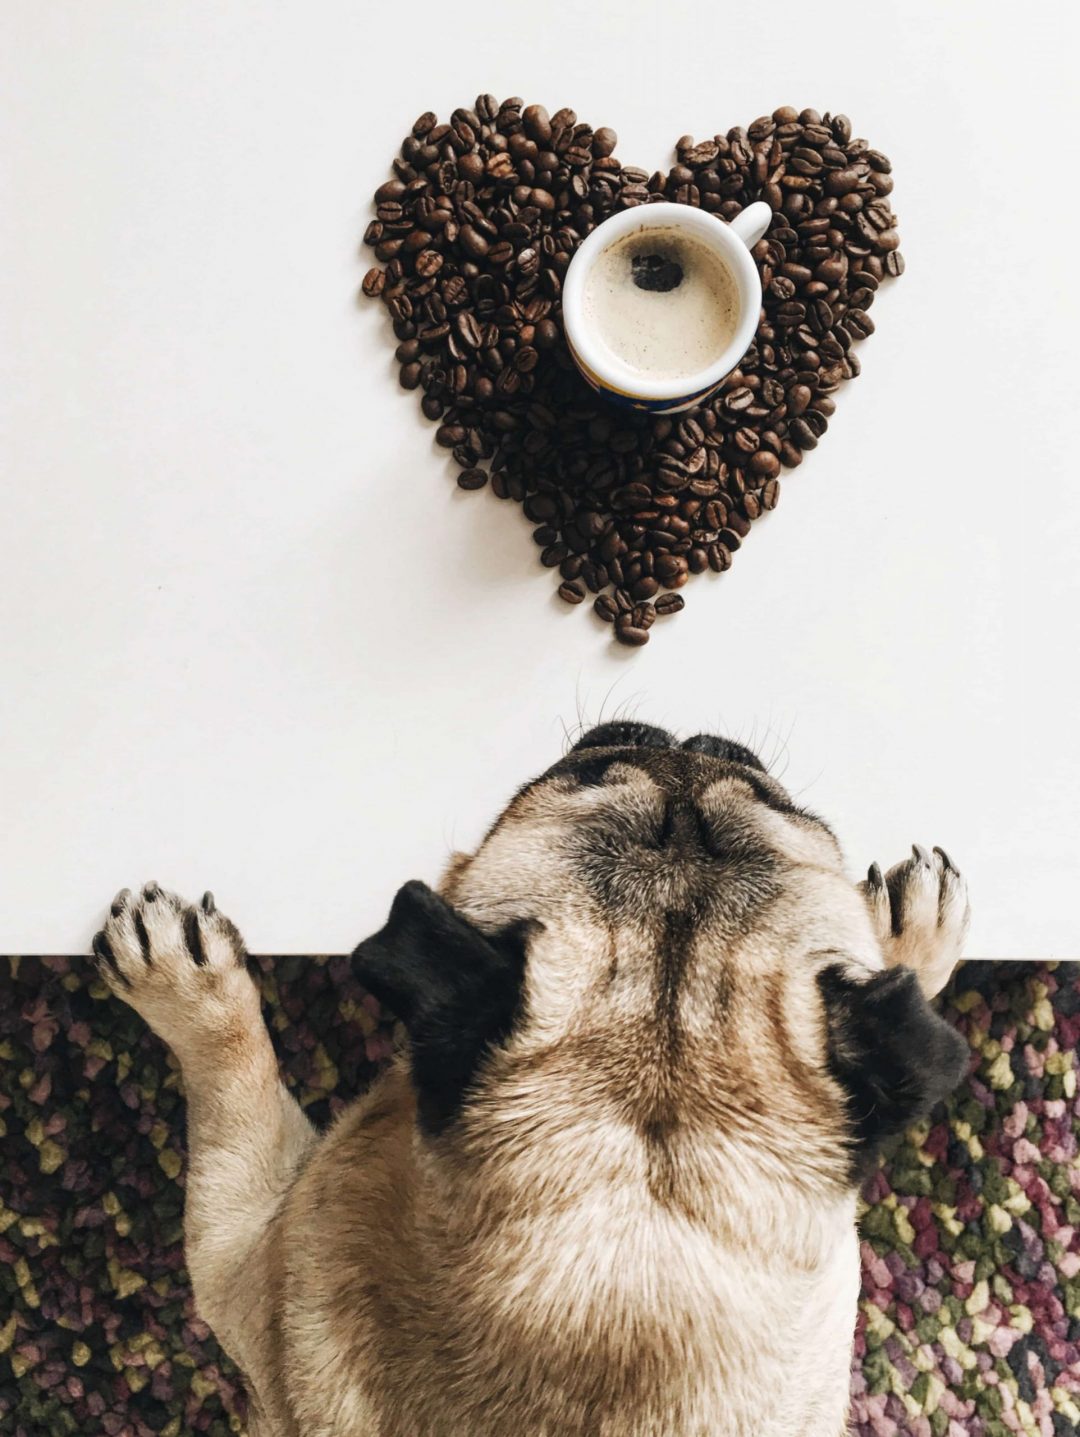 Pug wanting the coffee sitting on top of coffee beans shaped like a heart.